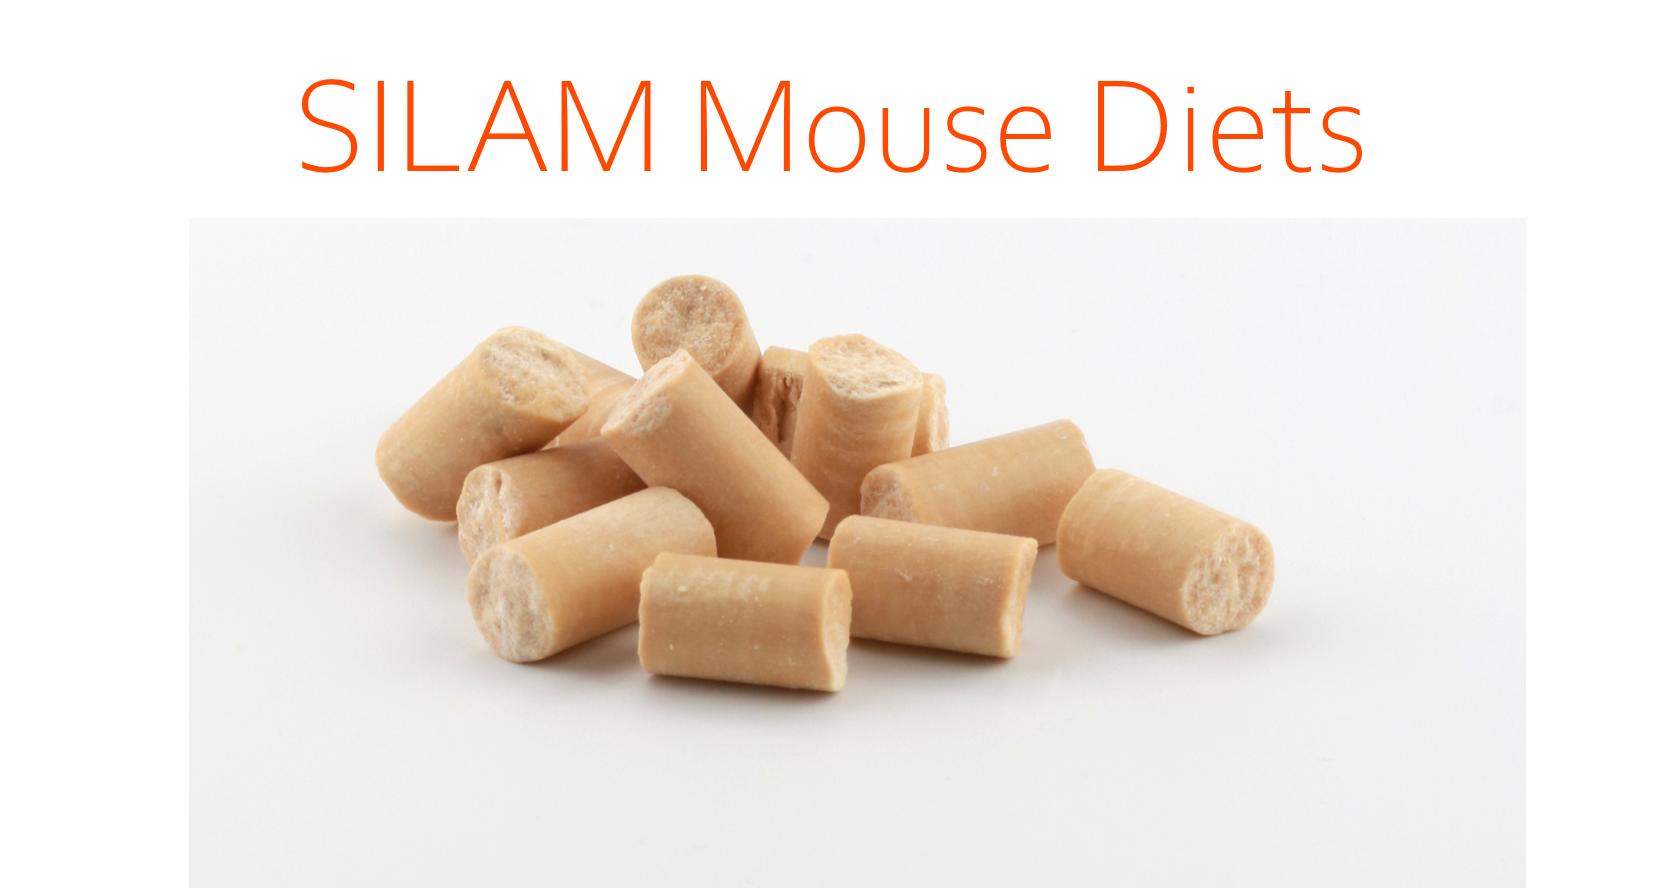 SILAM_Mouse_Diets_final